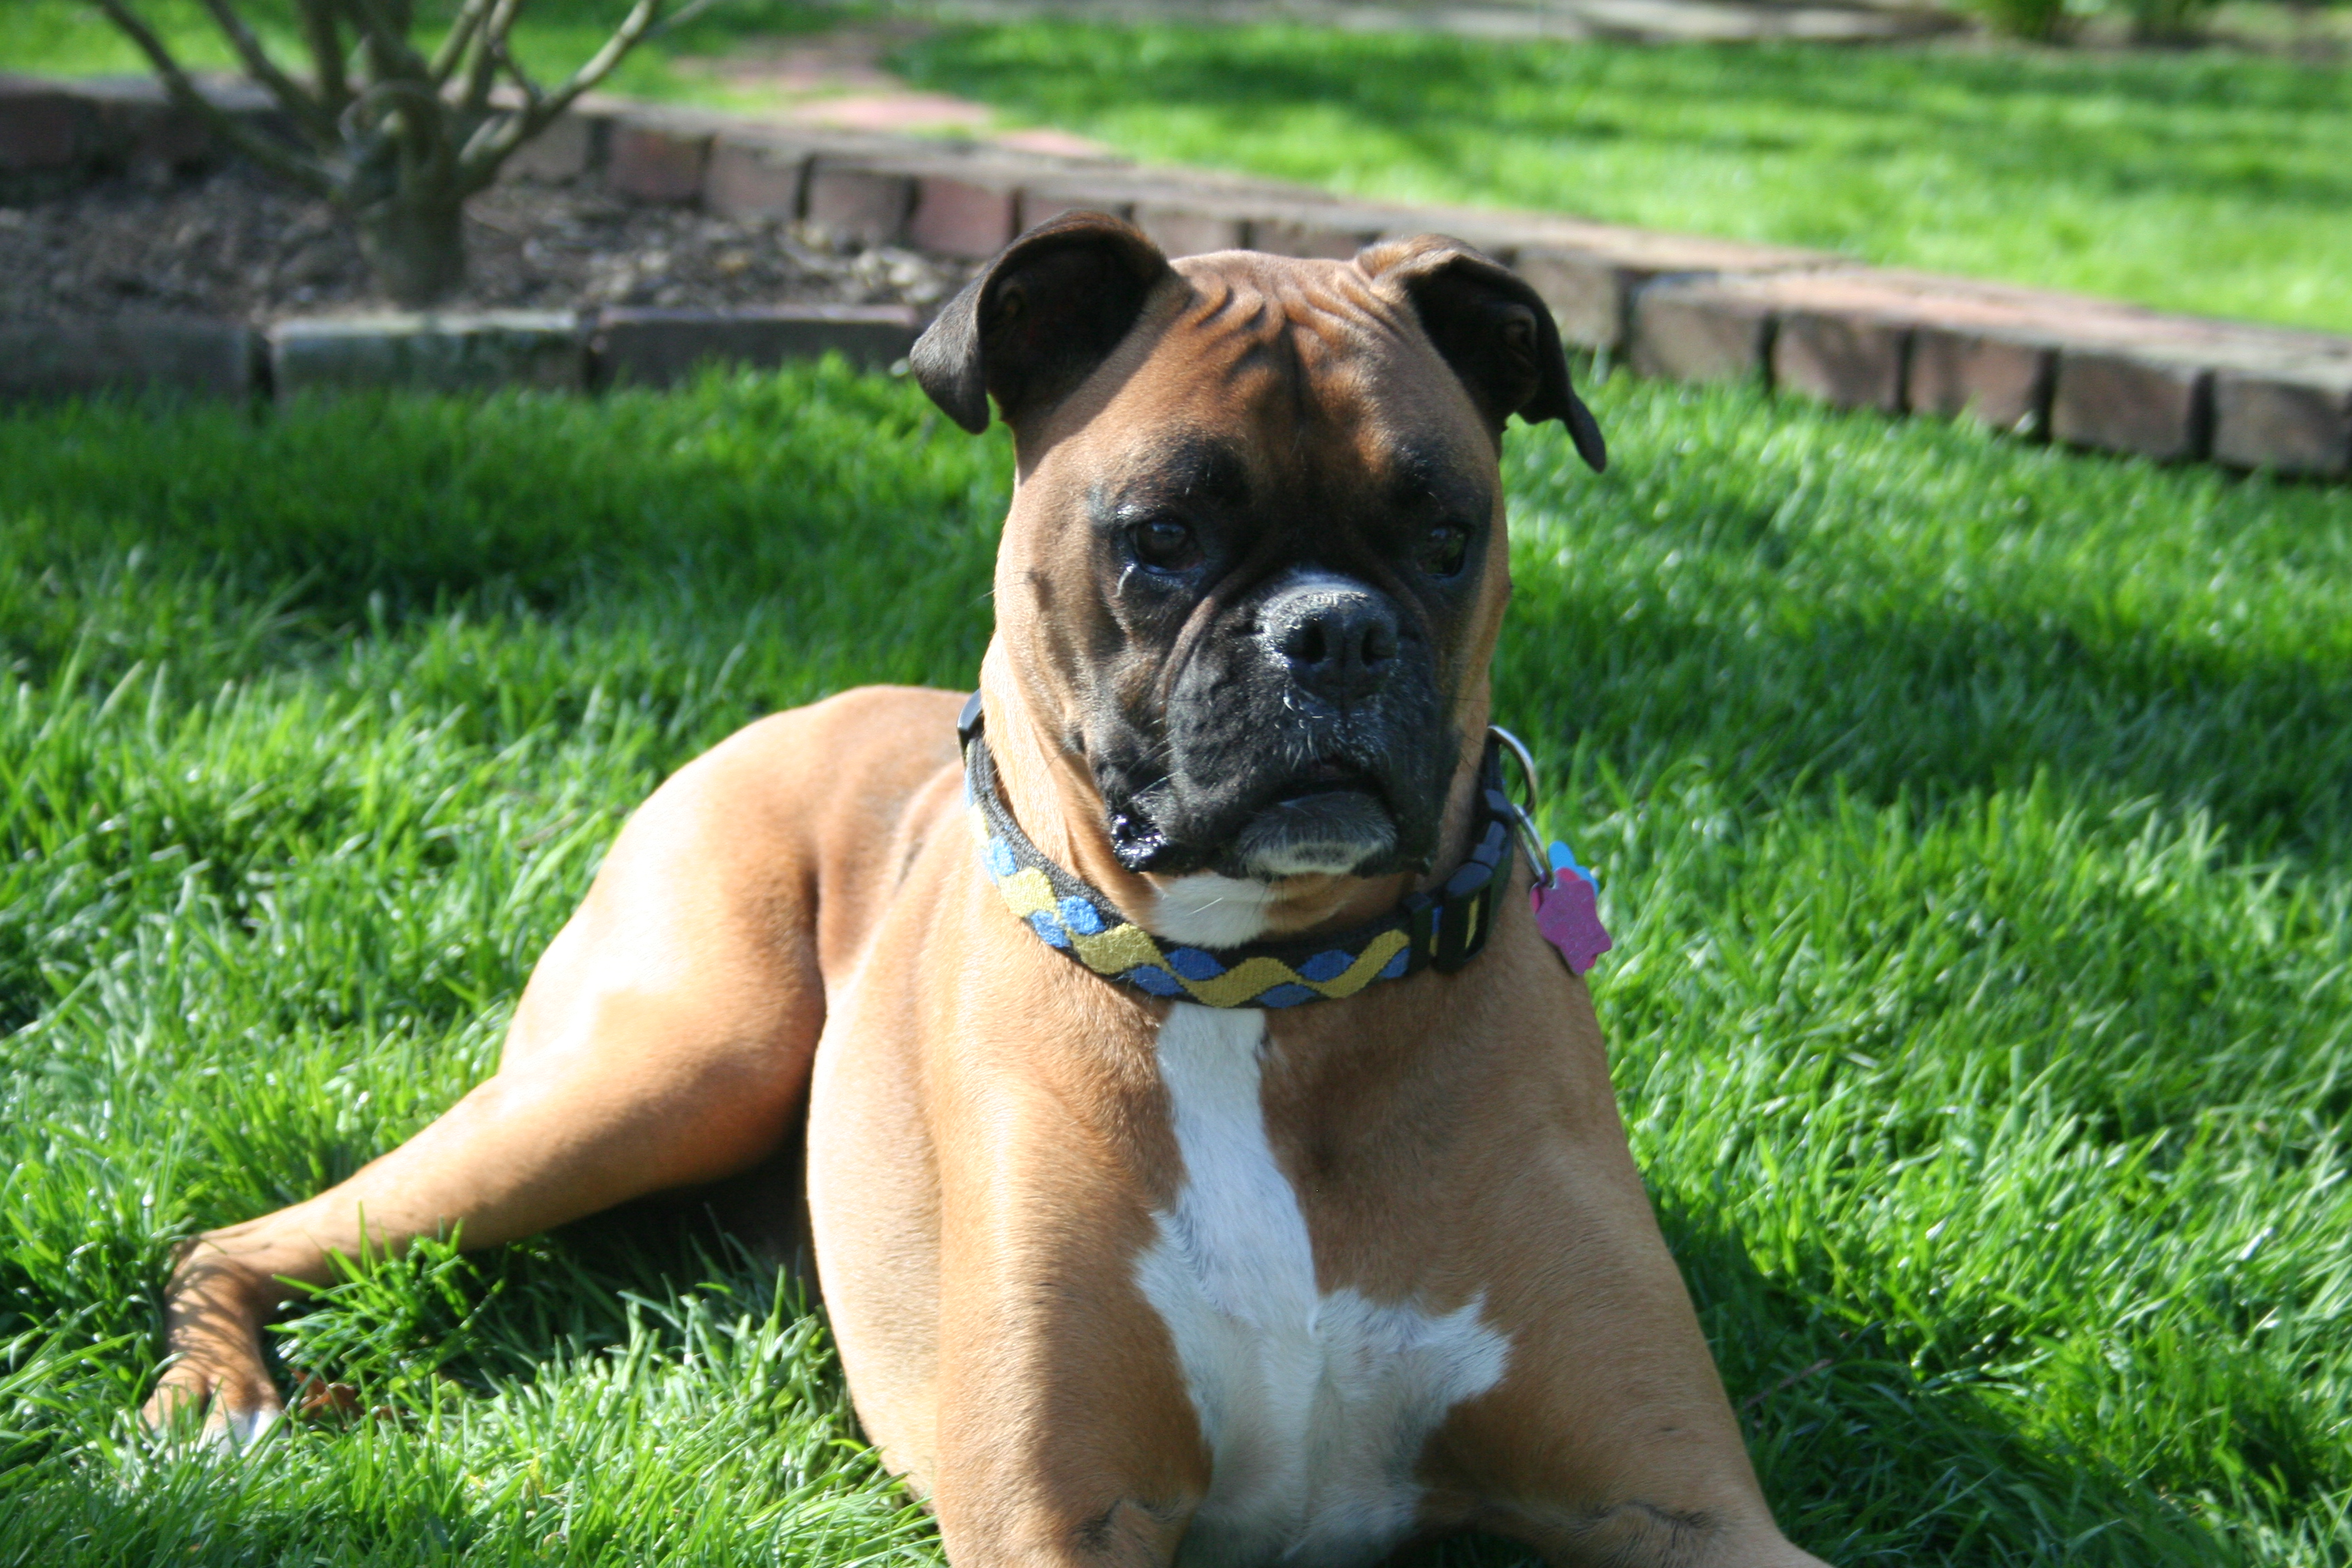 A Tribute for my beloved Boxer Dog “Irish” 9-11-03 – 9-11-12 ...